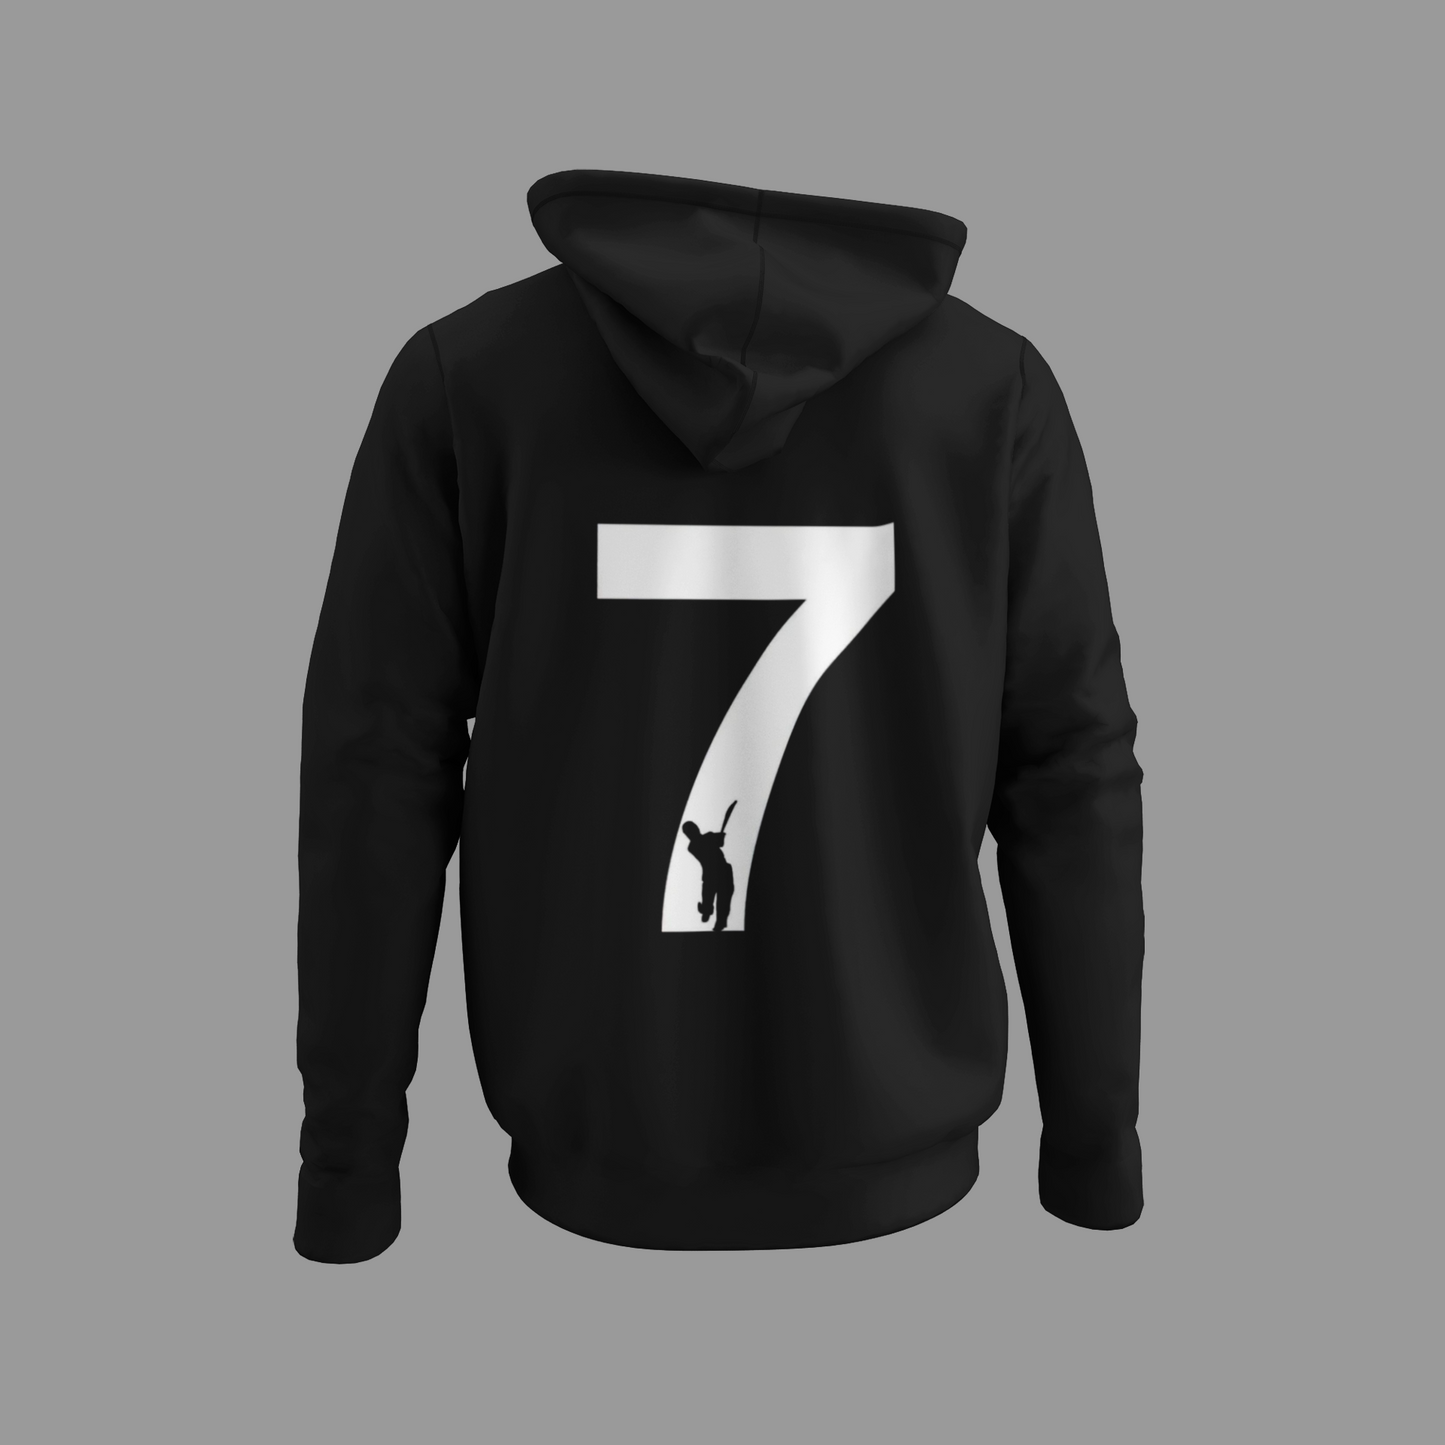 MS Dhoni 7 (Double Sided Print): WINTER HOODIES